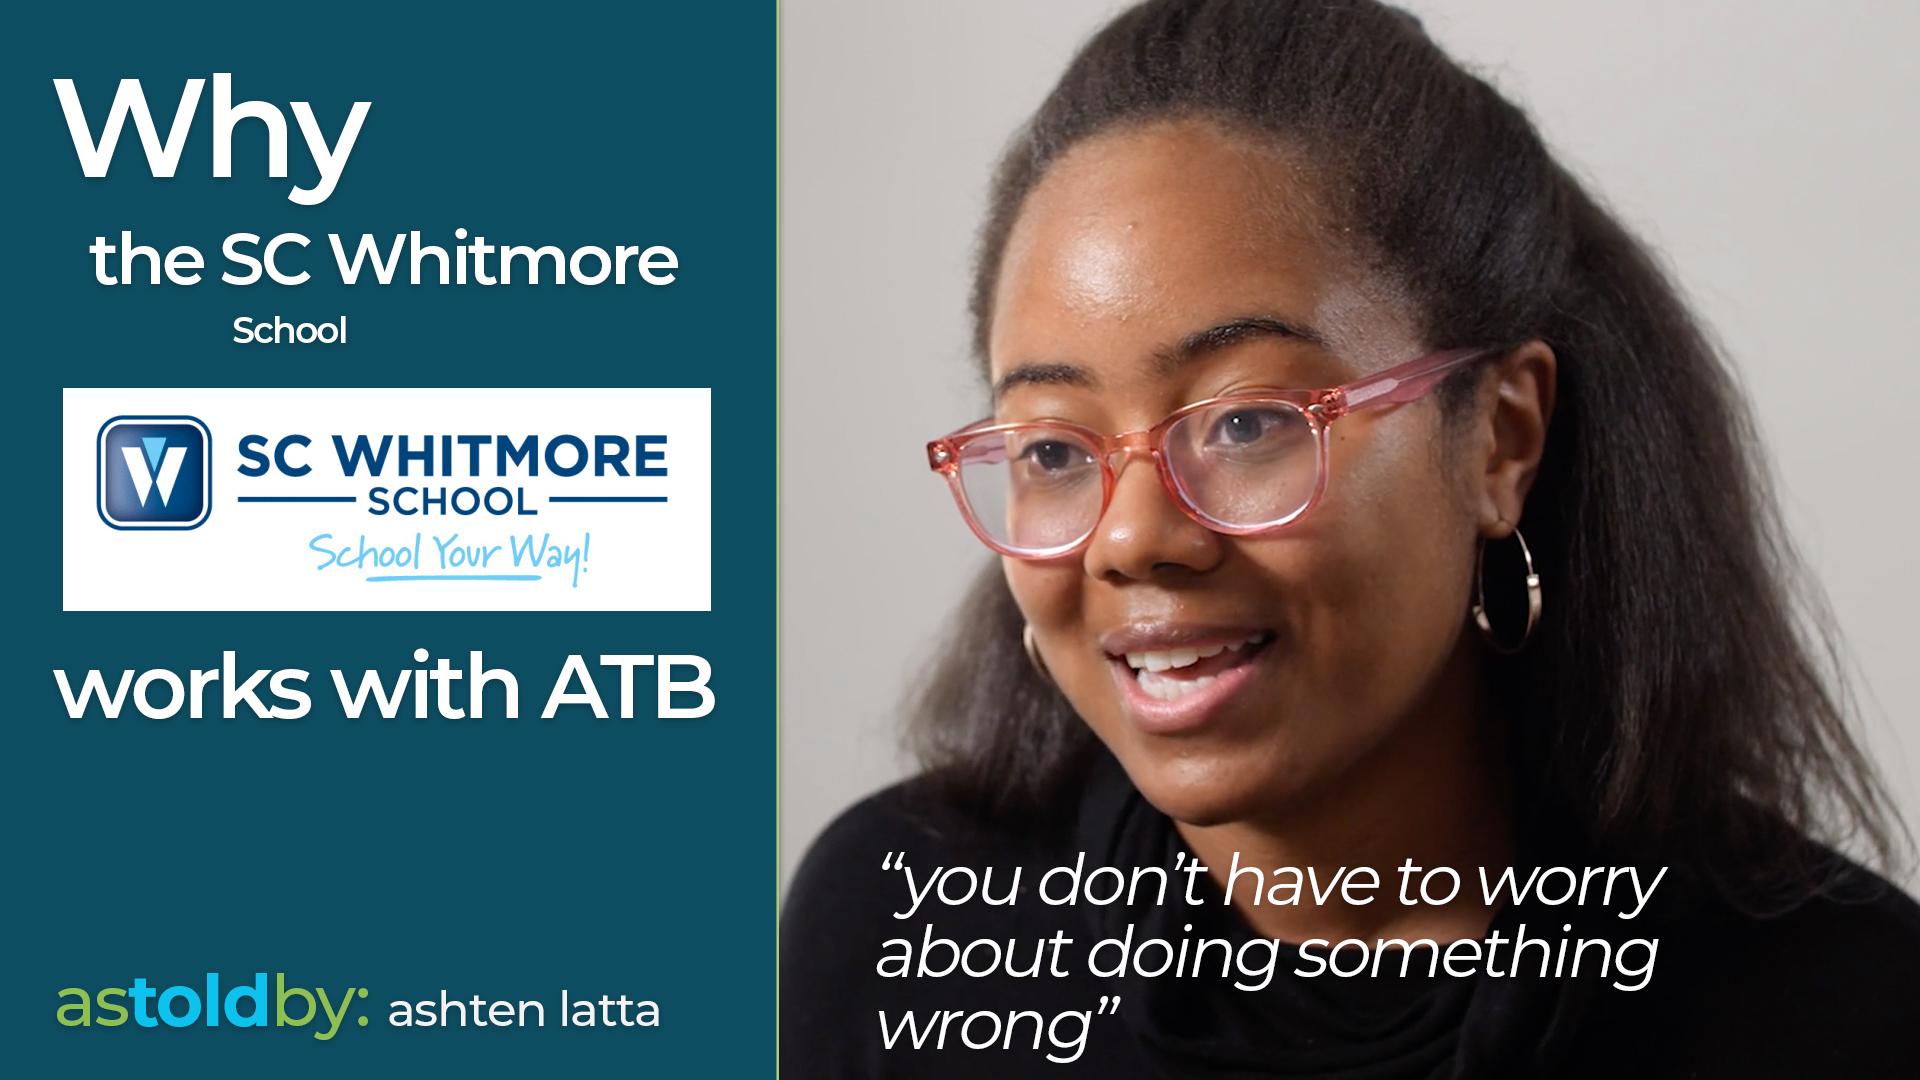 Thumbnail image for Whitmore School Testimonial about why they use ATB for video marketing